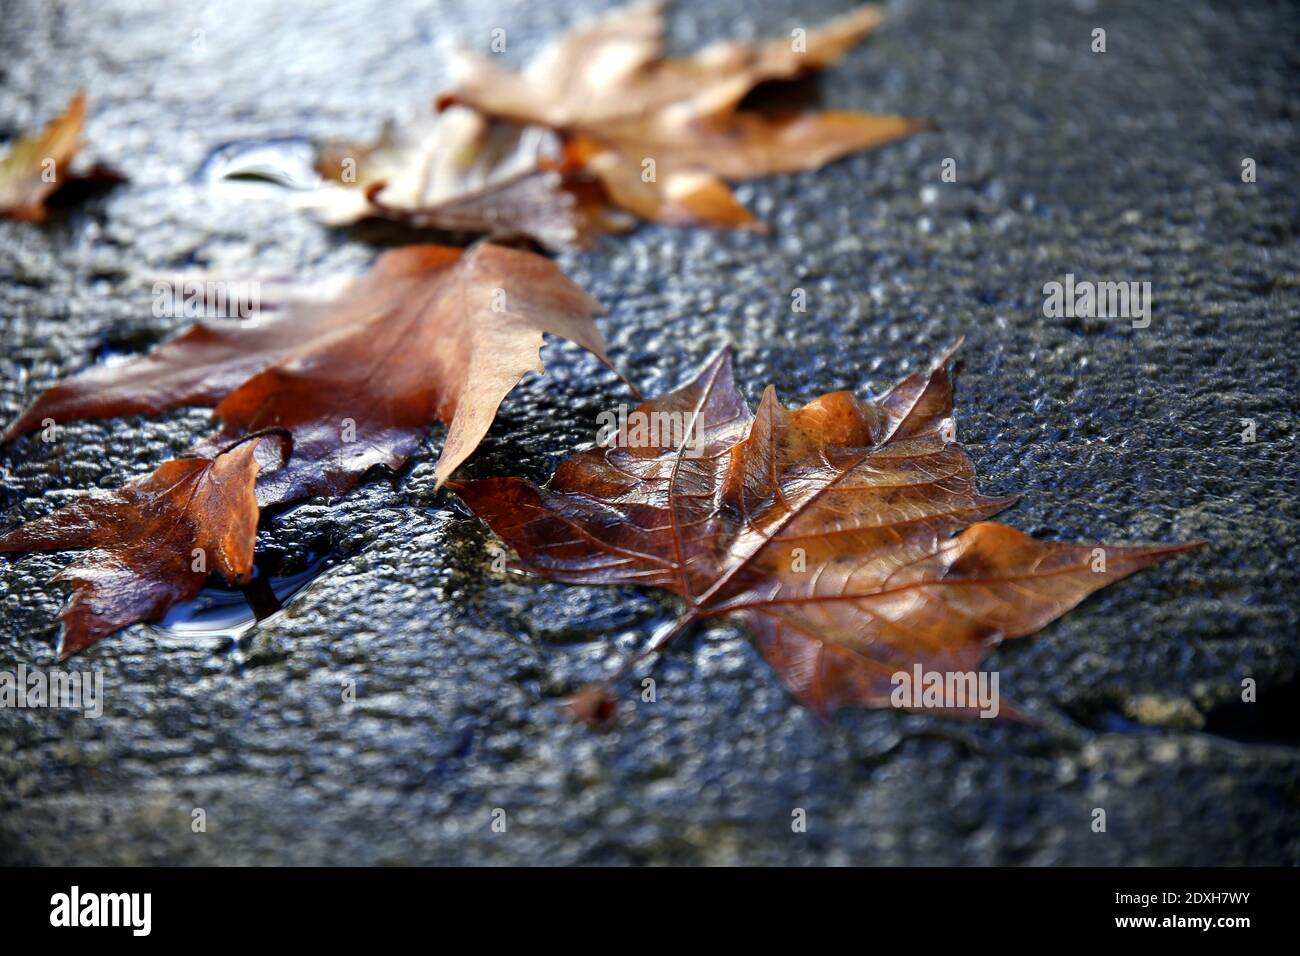 Dry Leaves Wet From The Rain, On A Dark Background Stock Photo - Alamy